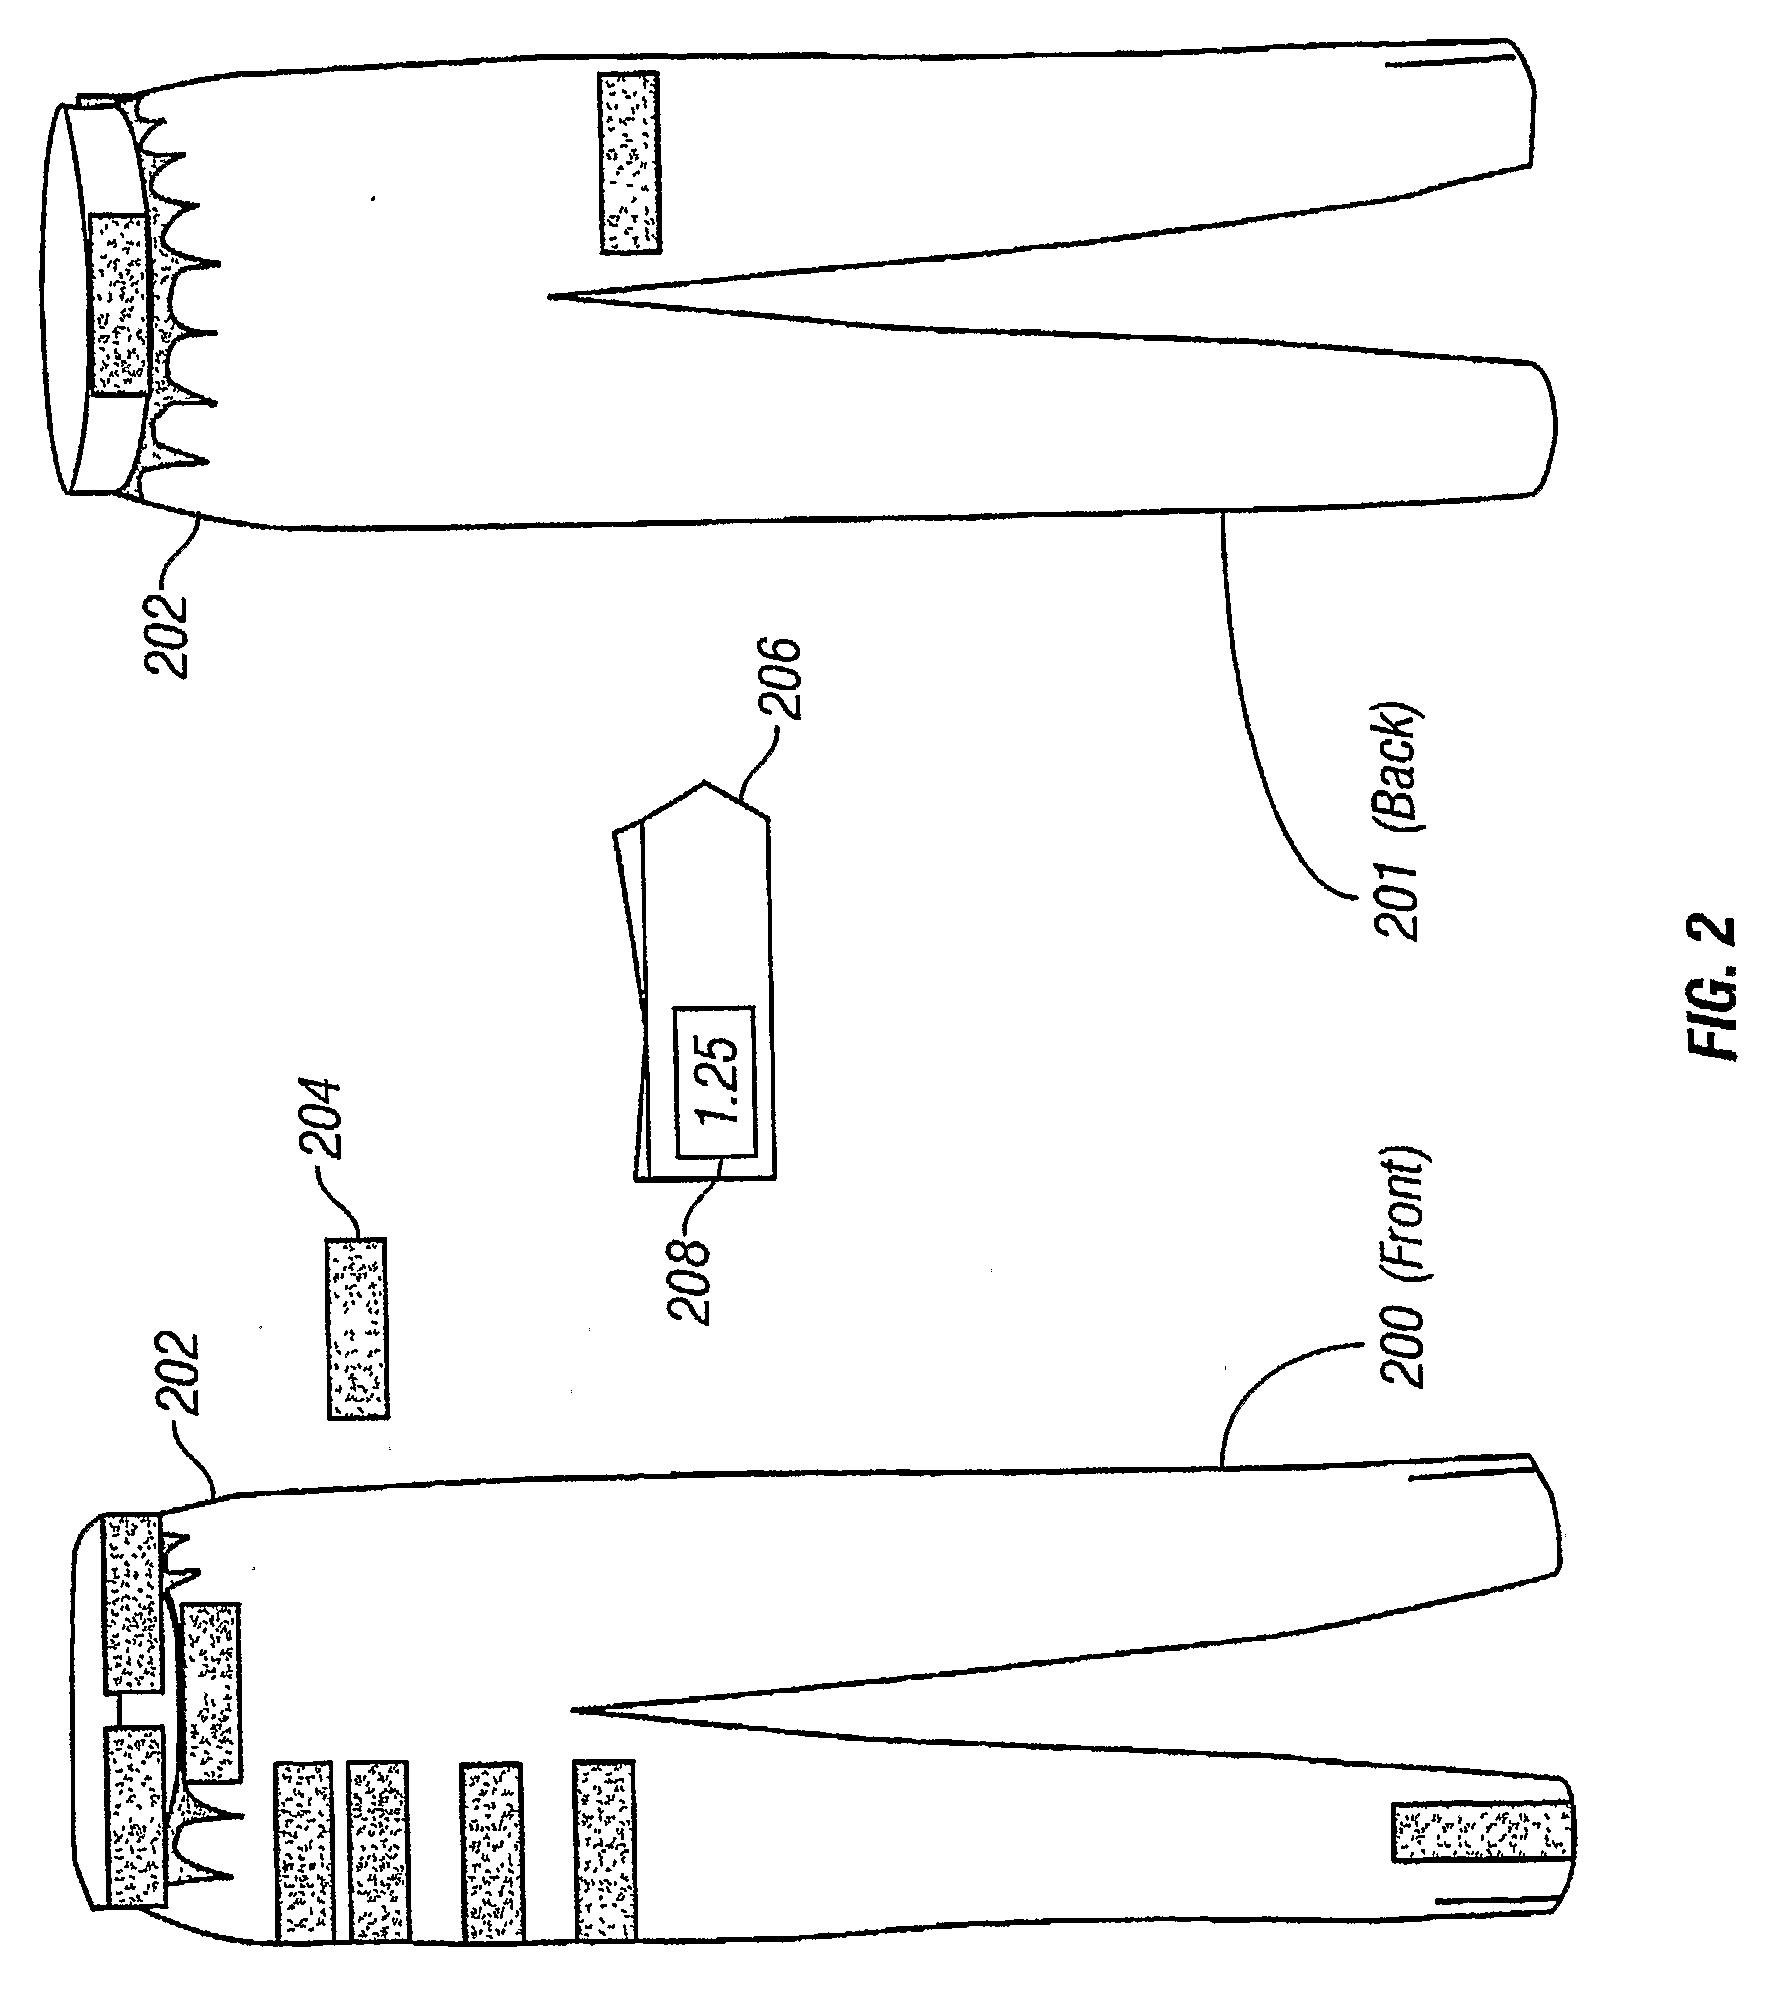 Method and Apparatus for Apparel Customization